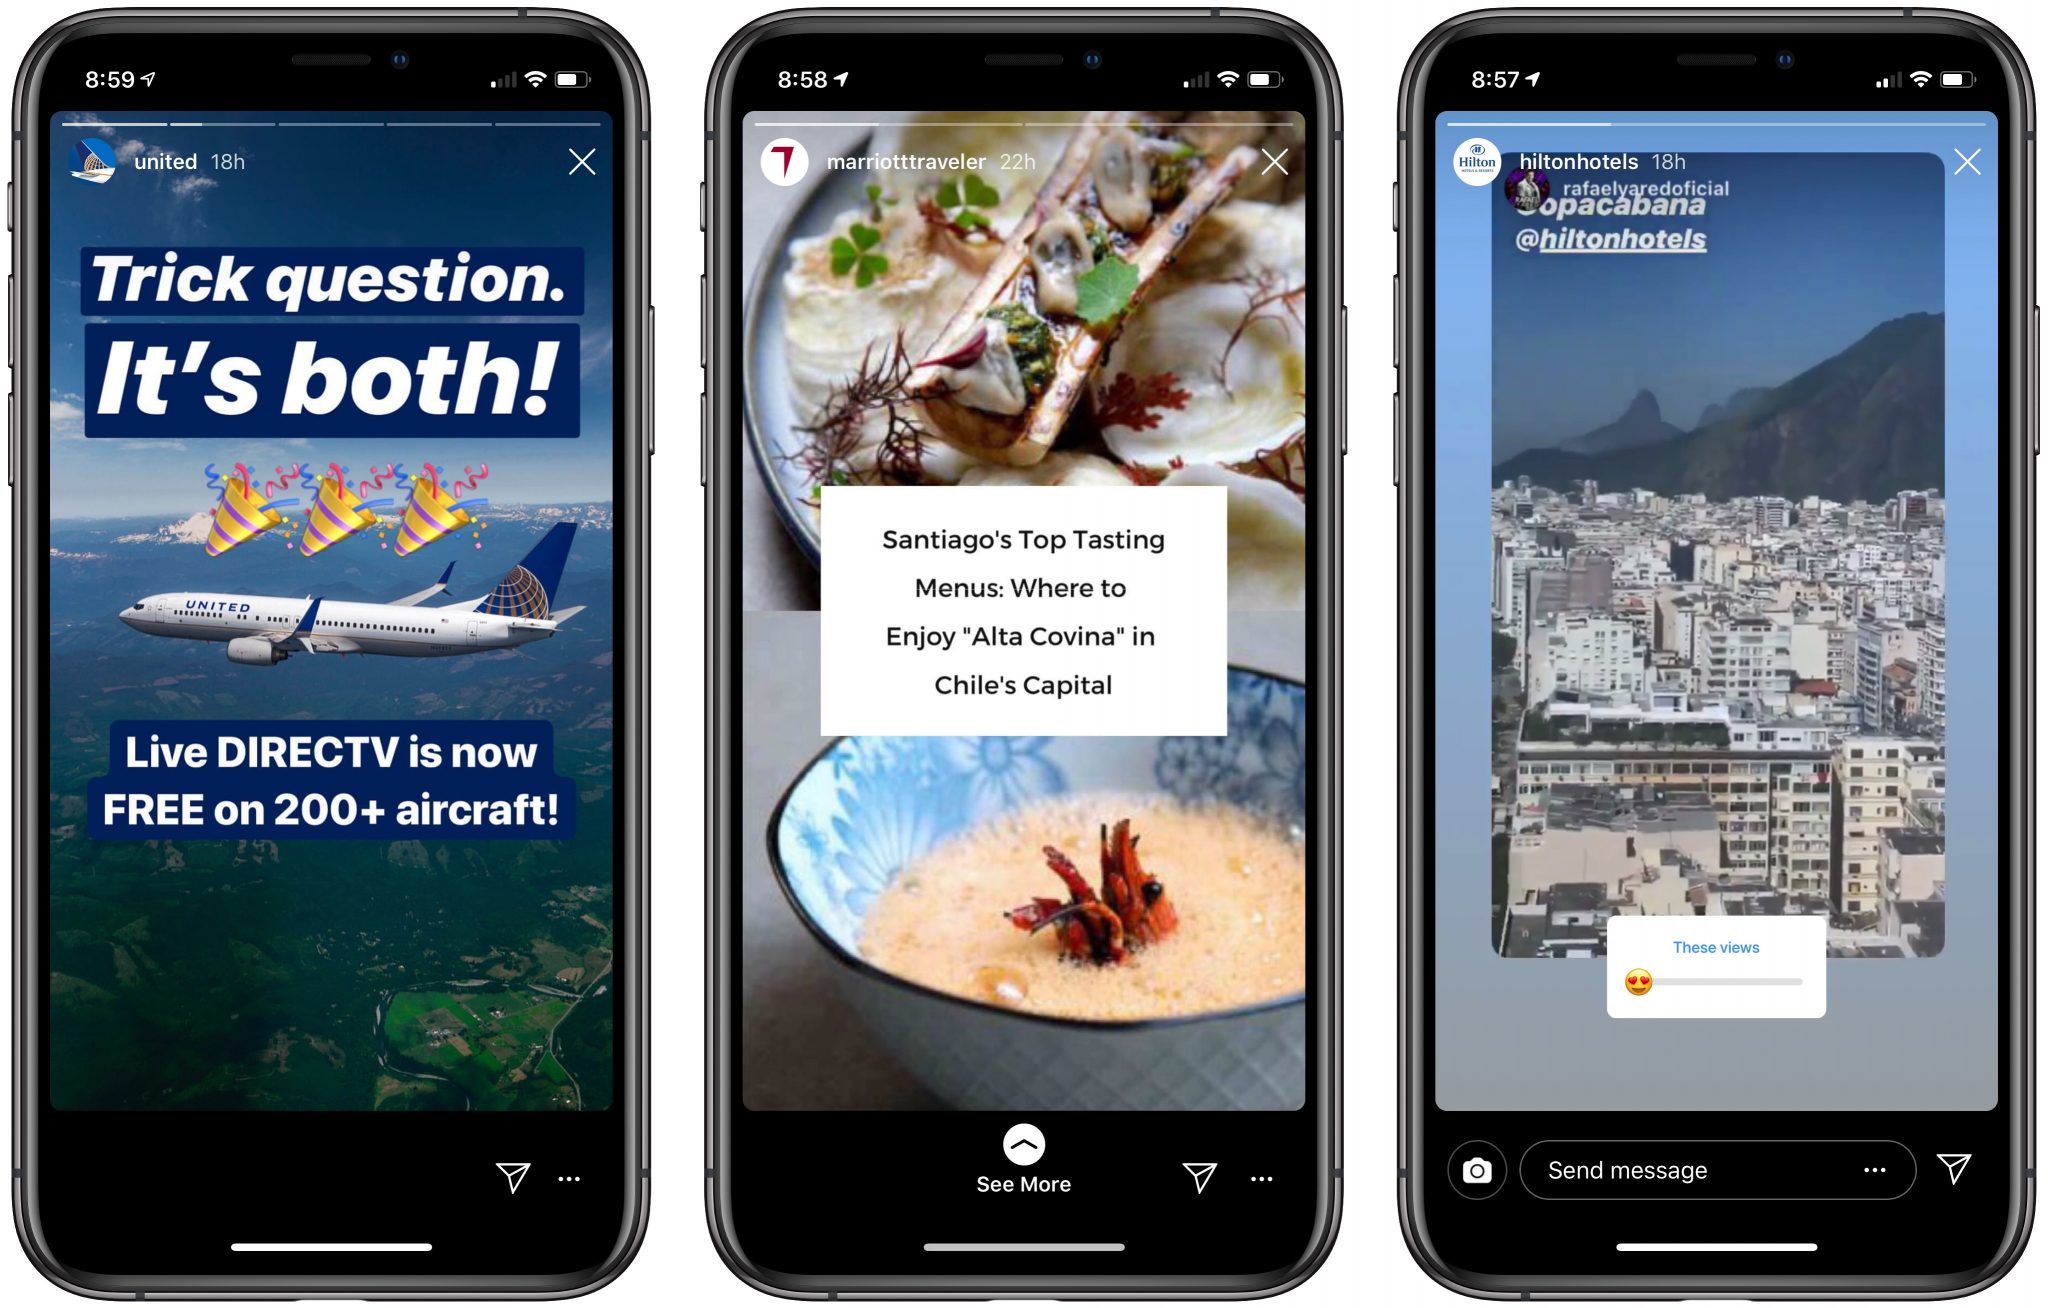 Facebook sees a lot more e-commerce potential in Stories and in messaging apps. Pictured are Instagram Stories from United Airlines, Marriott International, and Hilton Hotels. 